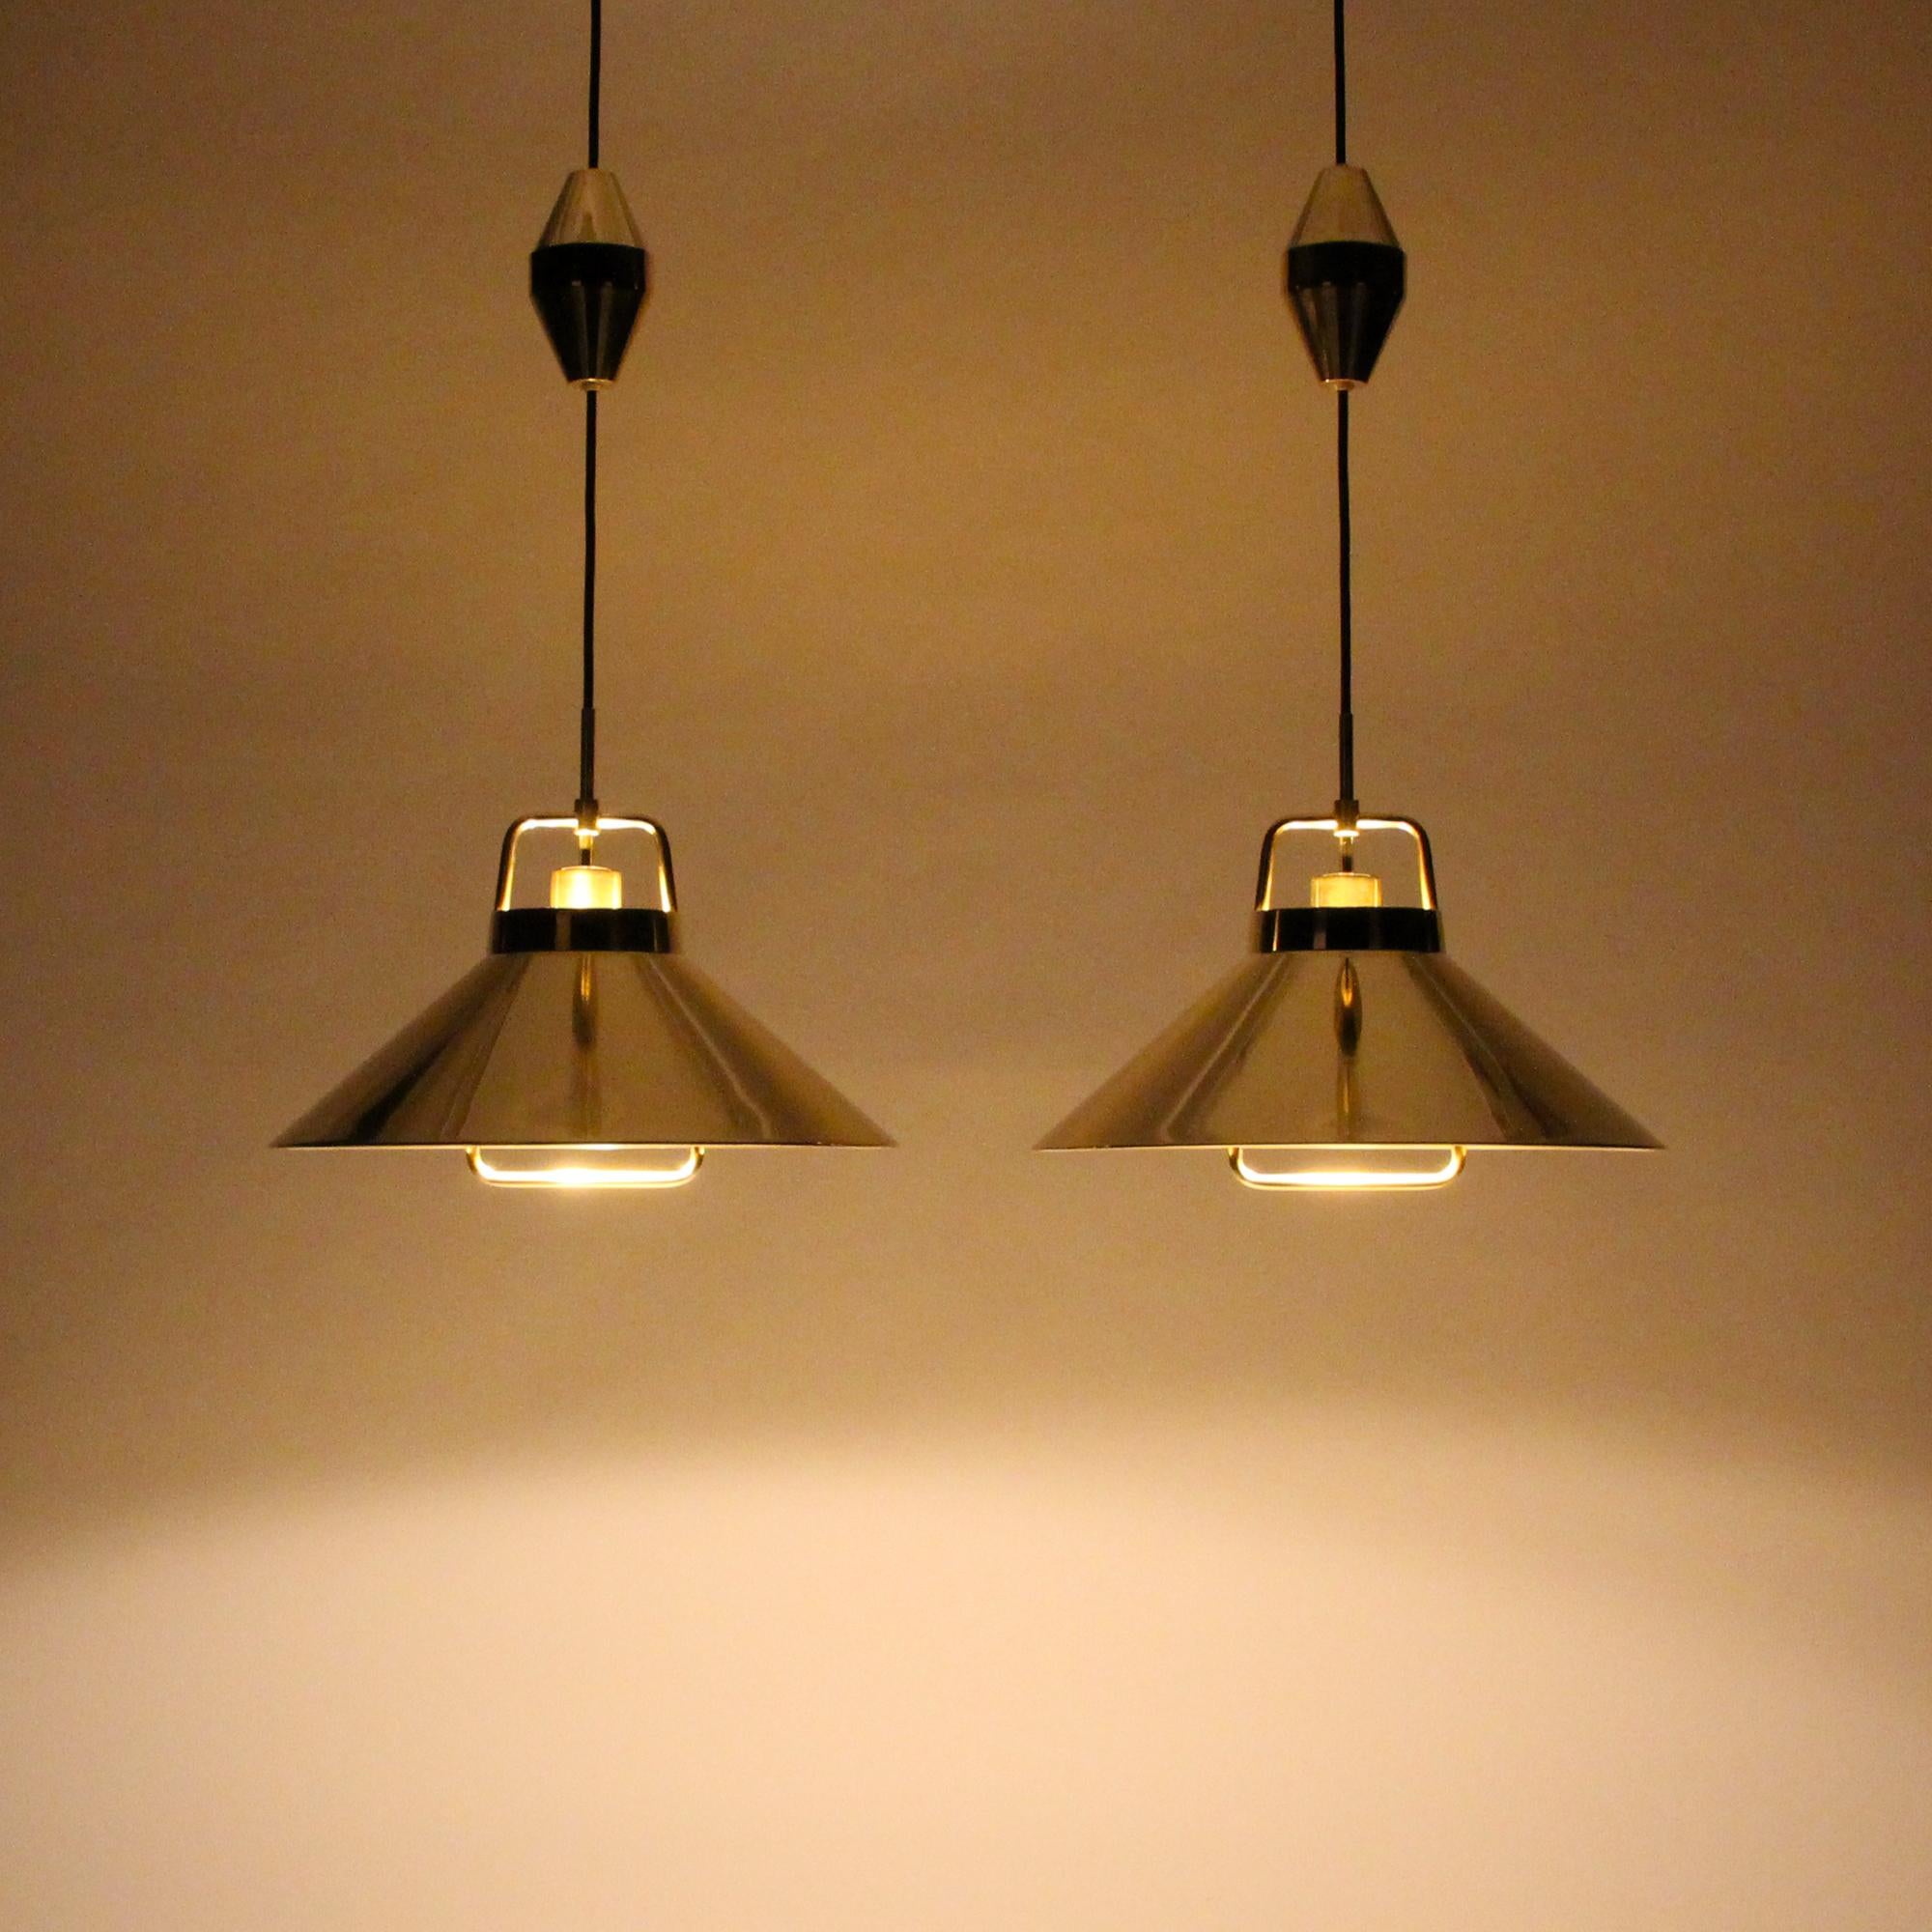 Mid-Century Modern P295 Pendant Pair by Fritz Schlegel in 1938 for Lyfa with Brass Suspensions